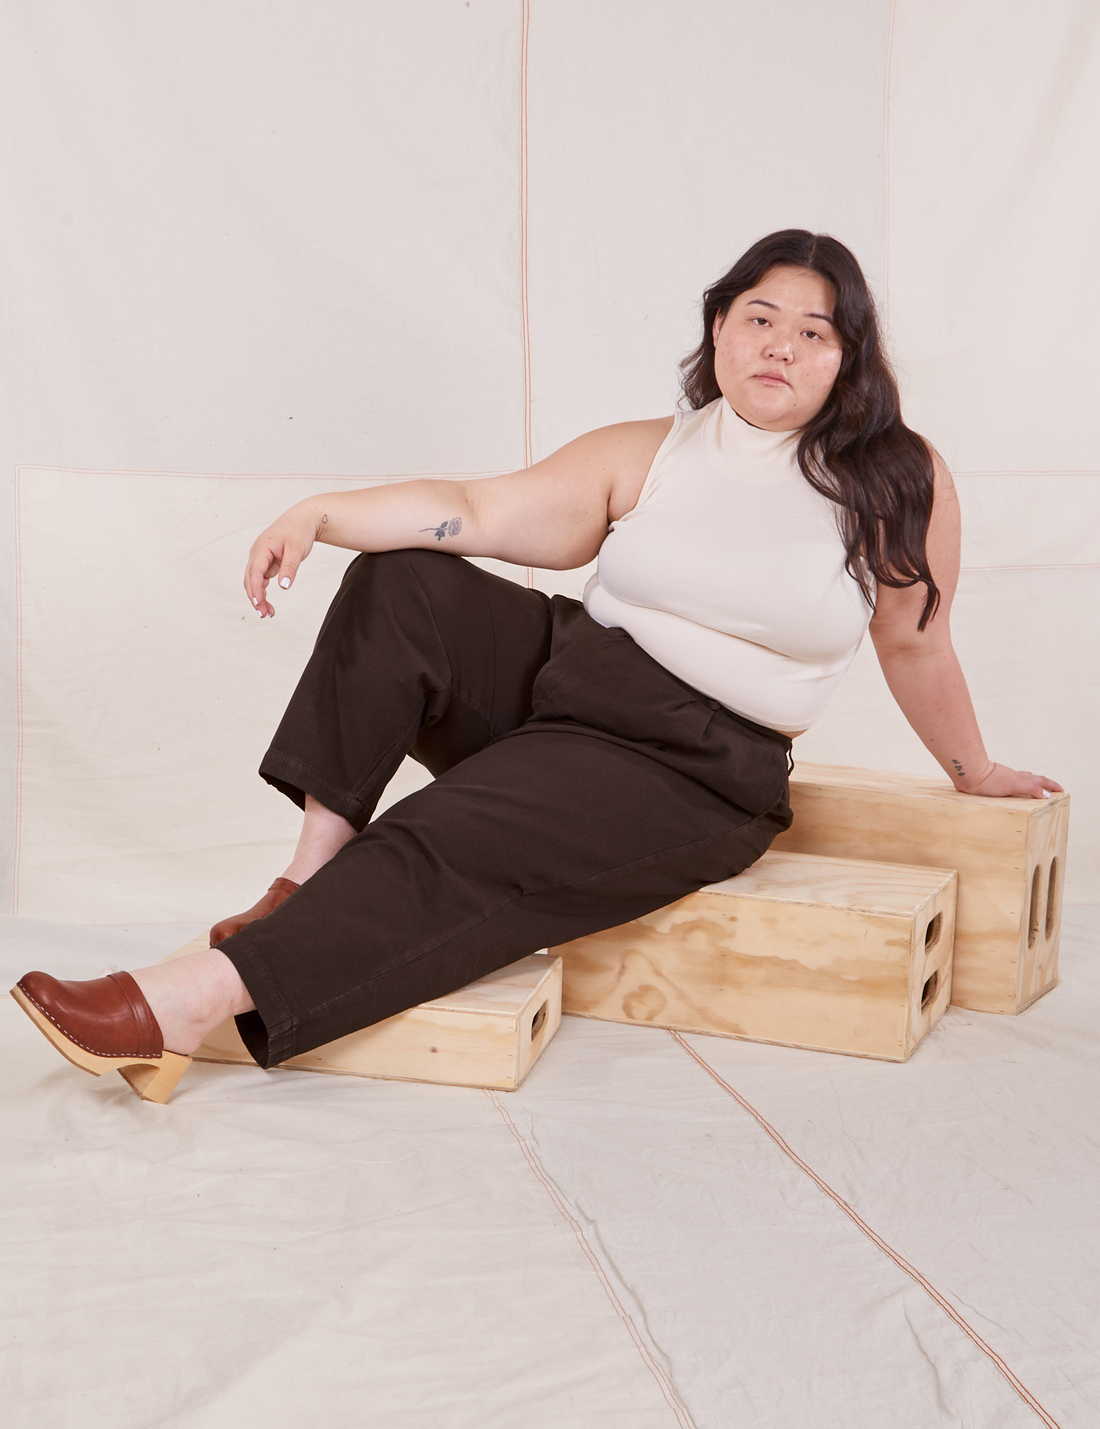 Ashley is wearing Heritage Trousers in Espresso Brown and vintage off-white Sleeveless Turtleneck